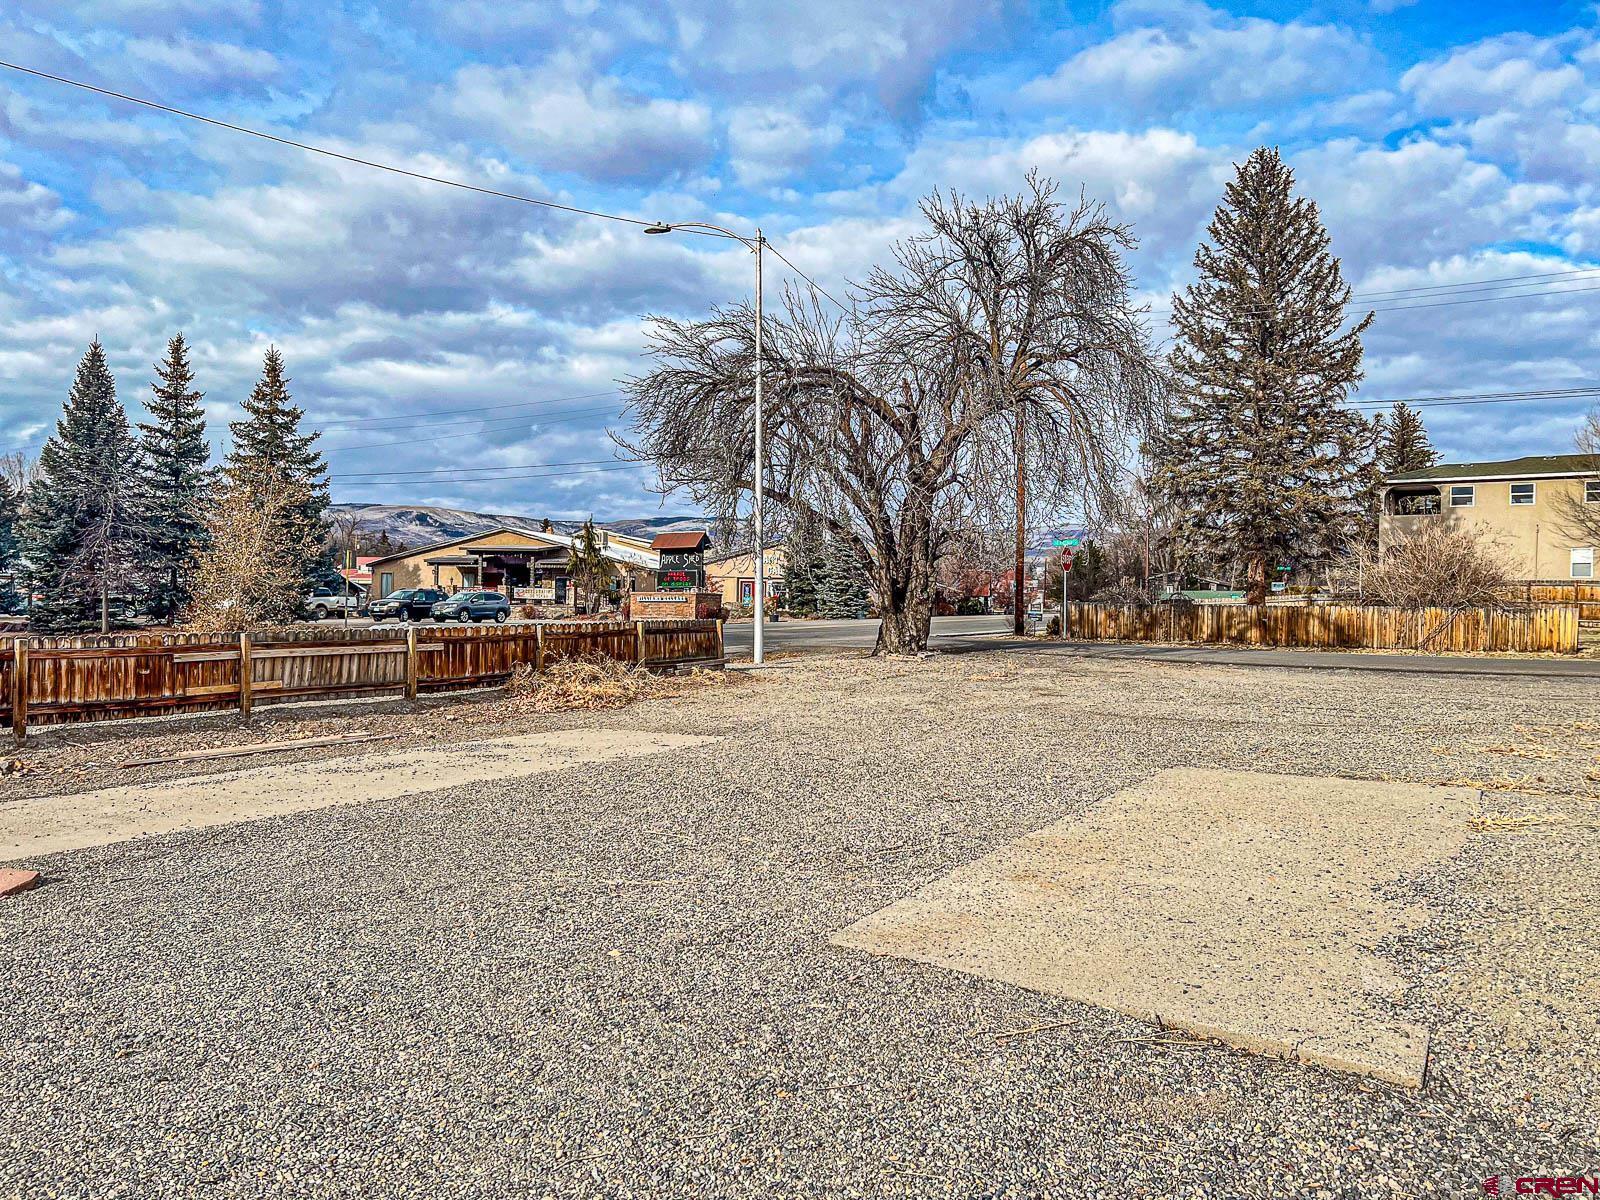 Are you looking for the perfect vacant lot in Cedaredge, Colorado? Look no further! This 0.16-acre corner lot is an excellent opportunity in a rapidly growing community. Whether you're looking to construct a home or a commercial building, this lot has it all. Electricity is already available on-site. And the best part? You can easily bring high-speed internet, natural gas, town sewer, and town water to the lot. Imagine the convenience and ease of starting your new venture with all the necessary utilities already in place. One of the biggest perks of this lot is its location along the Grand Mesa Scenic Byway. Known as the gateway to the Grand Mesa, this picturesque route offers breathtaking views and is a starting point for year-round mountain recreation. Whether you enjoy hiking, mountain biking, horseback riding, or ATV adventures, this region has it all. Additionally, being in the heart of Cedaredge means you'll be just a stone's throw away from the Pioneer Town Museum and many other local amenities. Cedaredge, Colorado, offers unparalleled opportunities for outdoor enthusiasts and small-town living. Located in Delta County, this region is known for its proximity to the Grand Mesa National Forest, where you can enjoy activities like big-game hunting, skiing and snowboarding at Powderhorn Resort, and fly fishing the Gold-Medal waters of the Gunnison River. On top of that, Cedaredge offers community events like free summer concerts and the annual Applefest celebration. With its amazing climate and access to world-class outdoor activities, Cedaredge is the perfect place to call home.